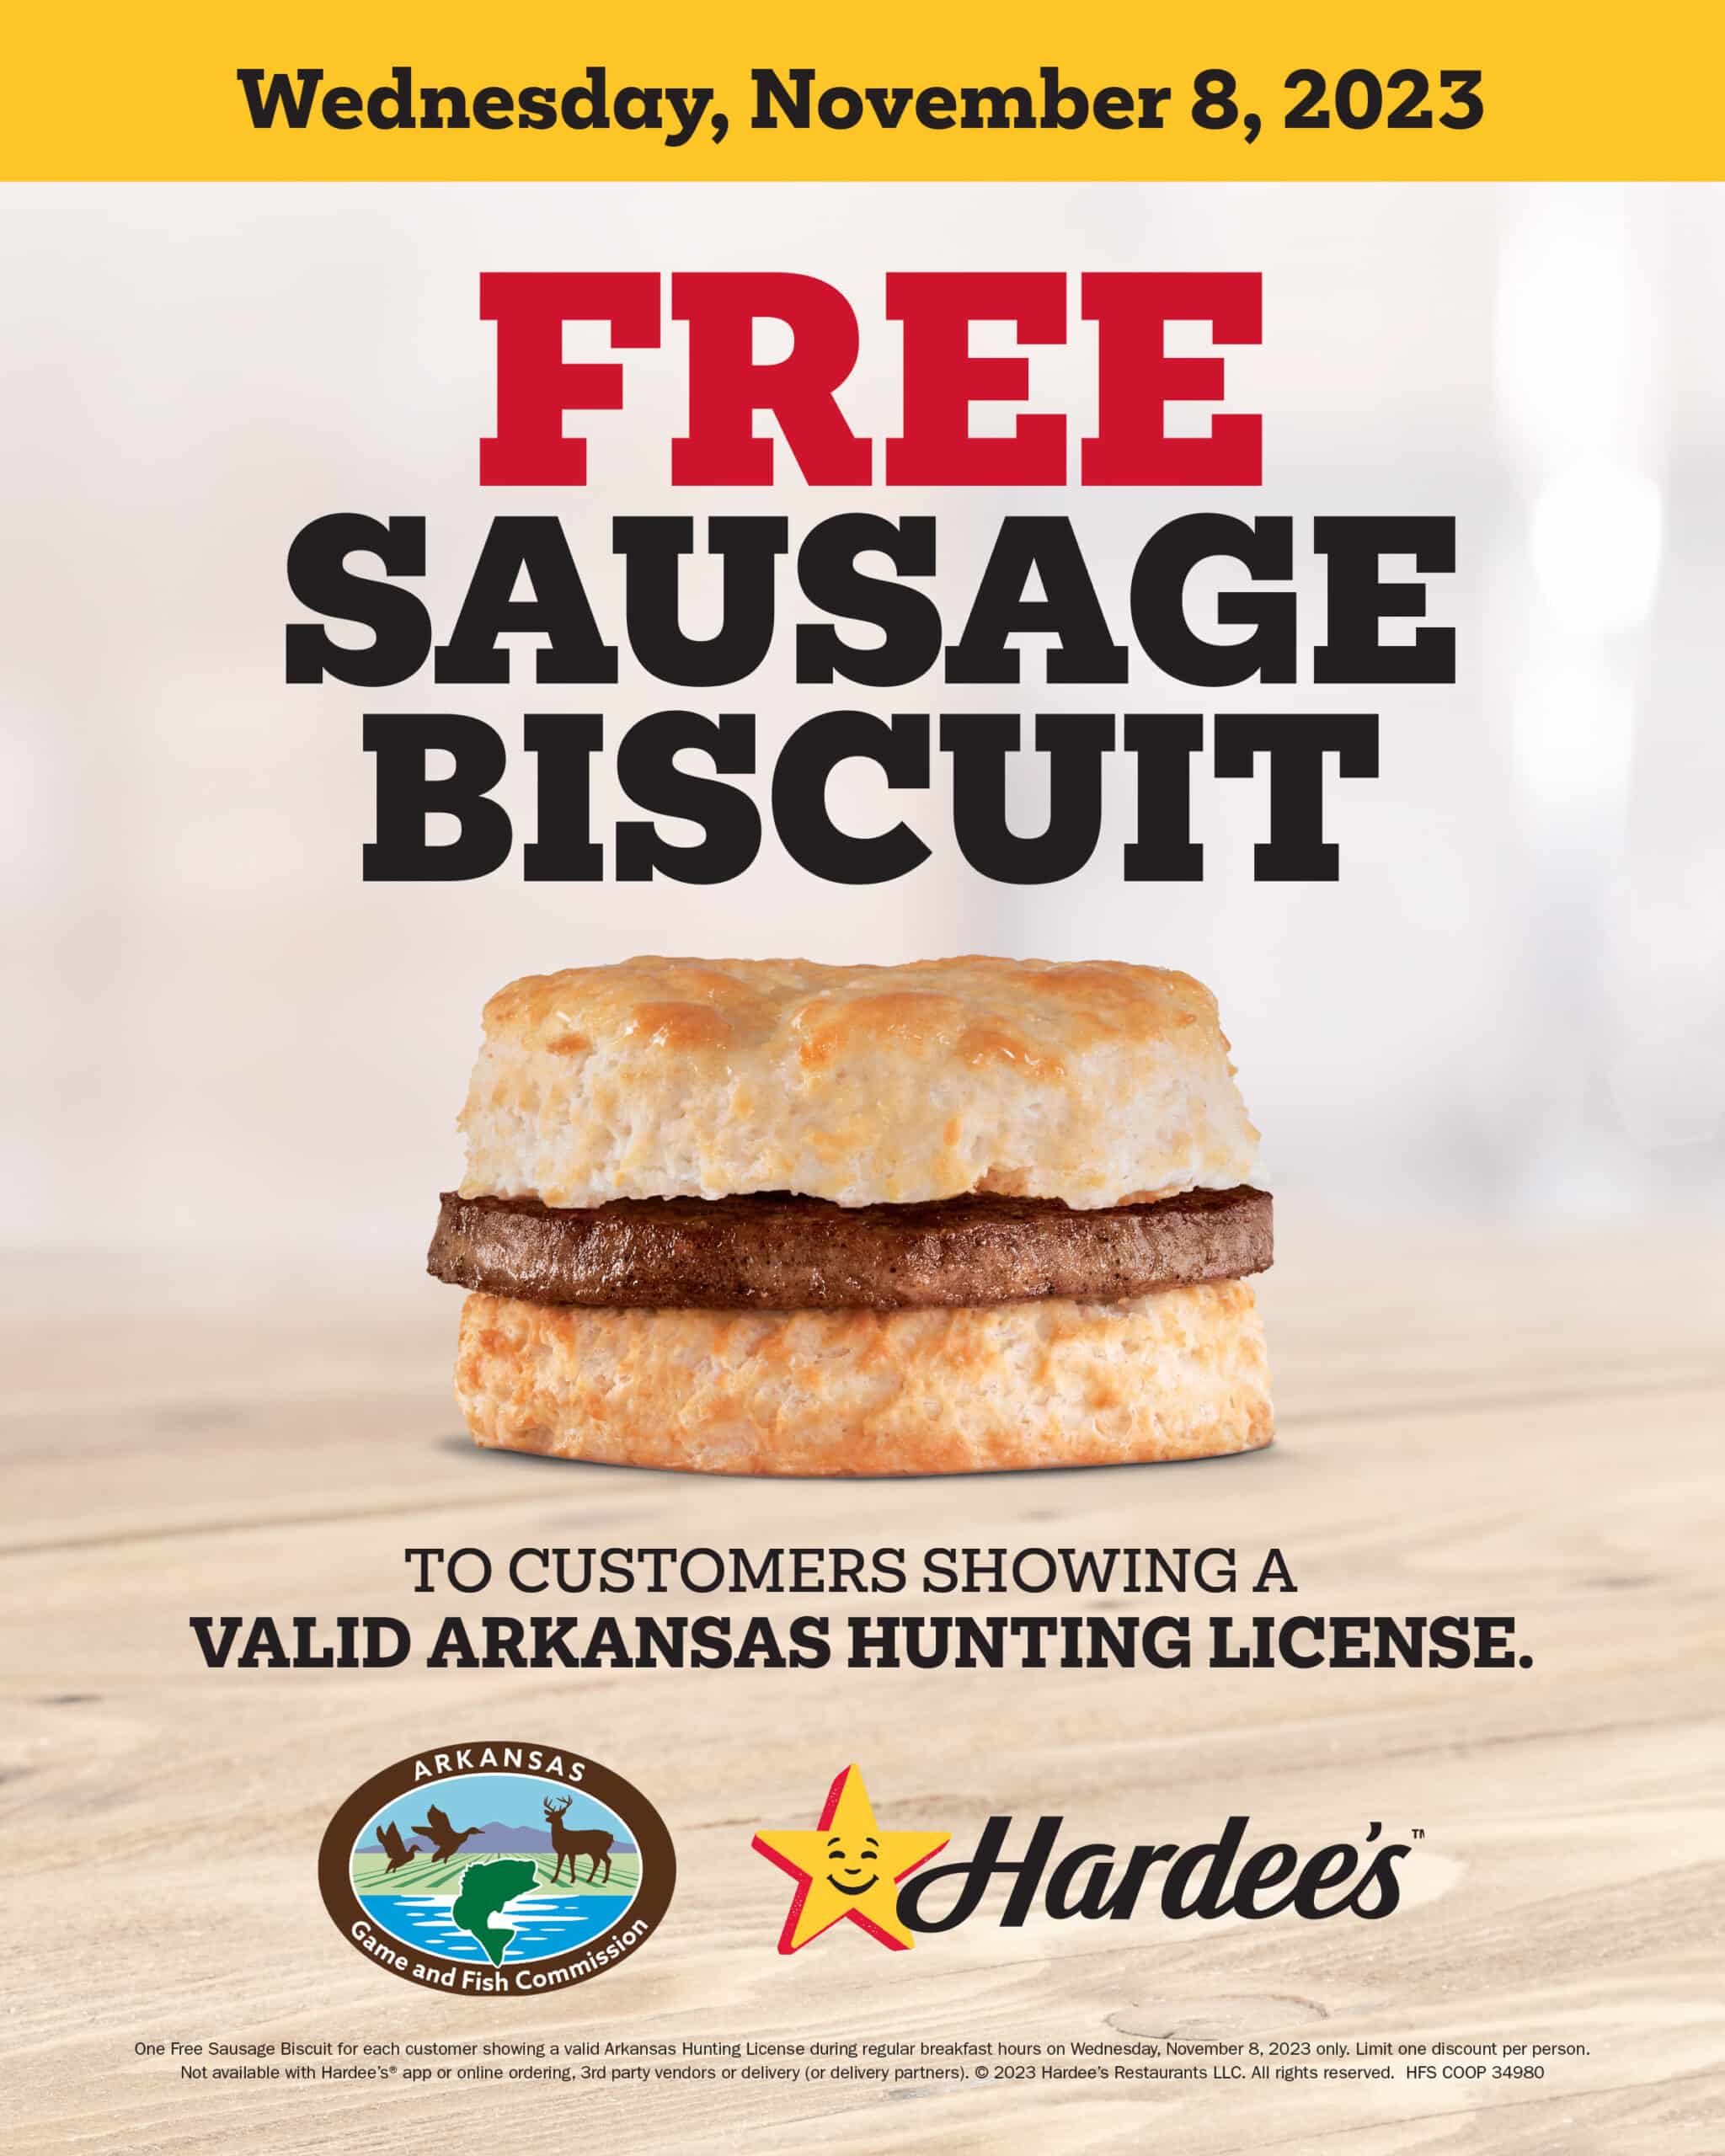 What Time is Breakfast Over at Hardee's? Don't Miss Out!